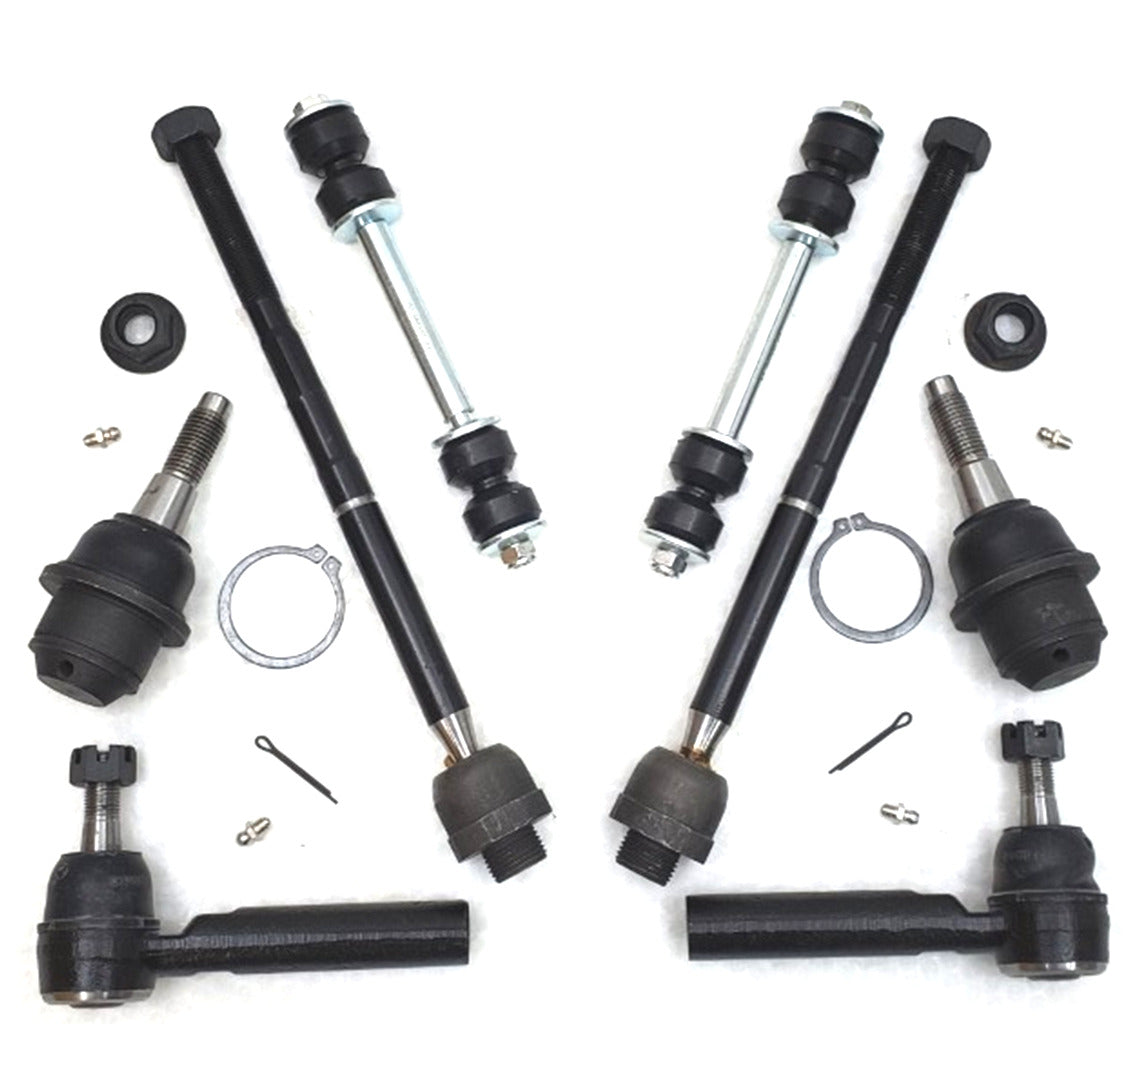 Lifetime Ball Joint Tie Rod Link Steering Kit for 2007-2013 Chevrolet, GMC, Cadillac 2WD, 4x4